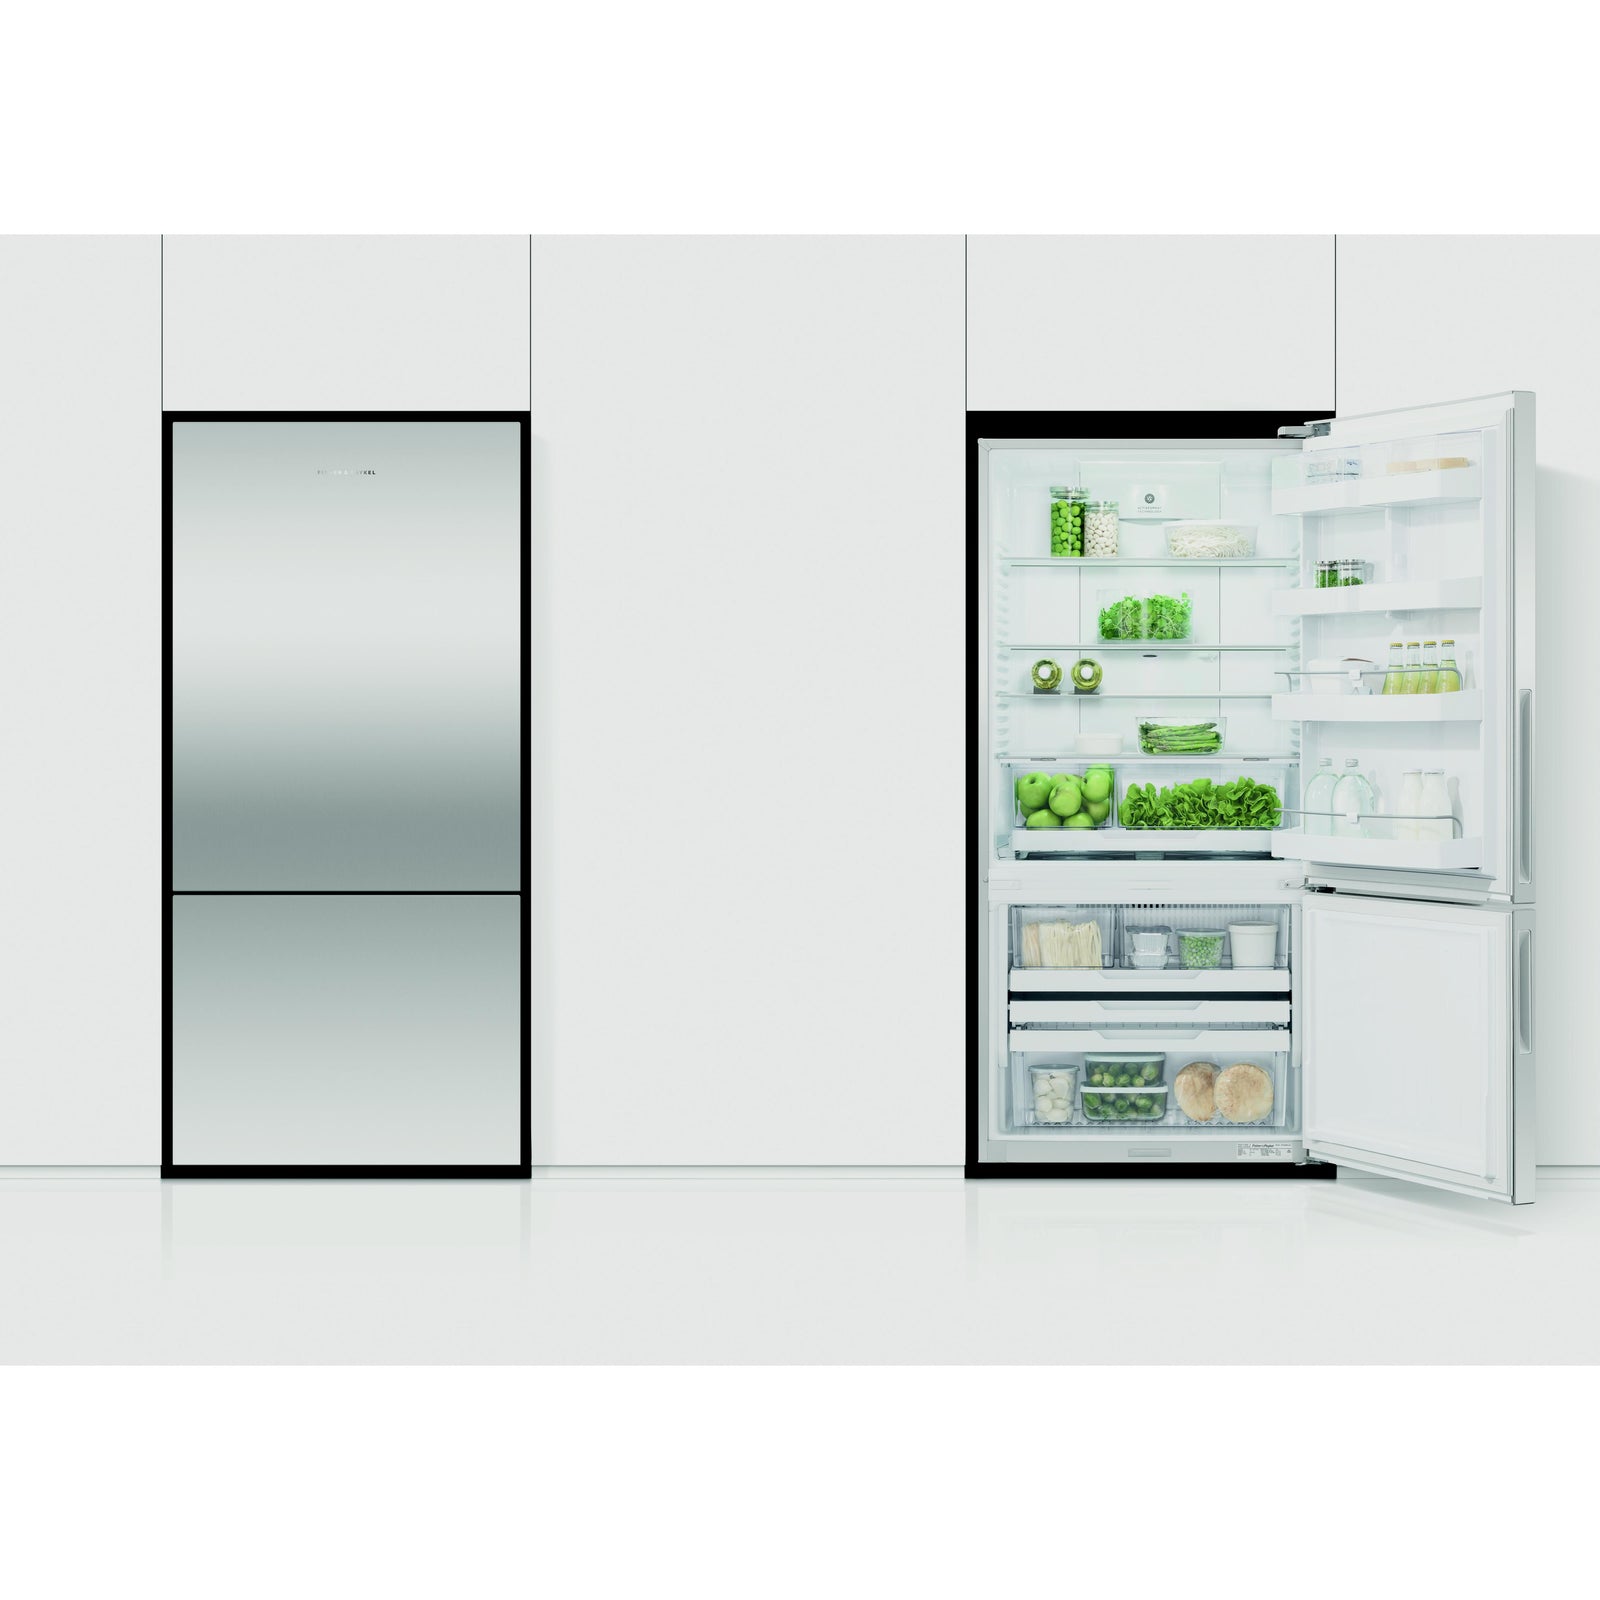 Buy Fisher & Paykel 32-inch, 17.6 cu. ft. Counter-Depth Bottom Freezer Refrigerator with 